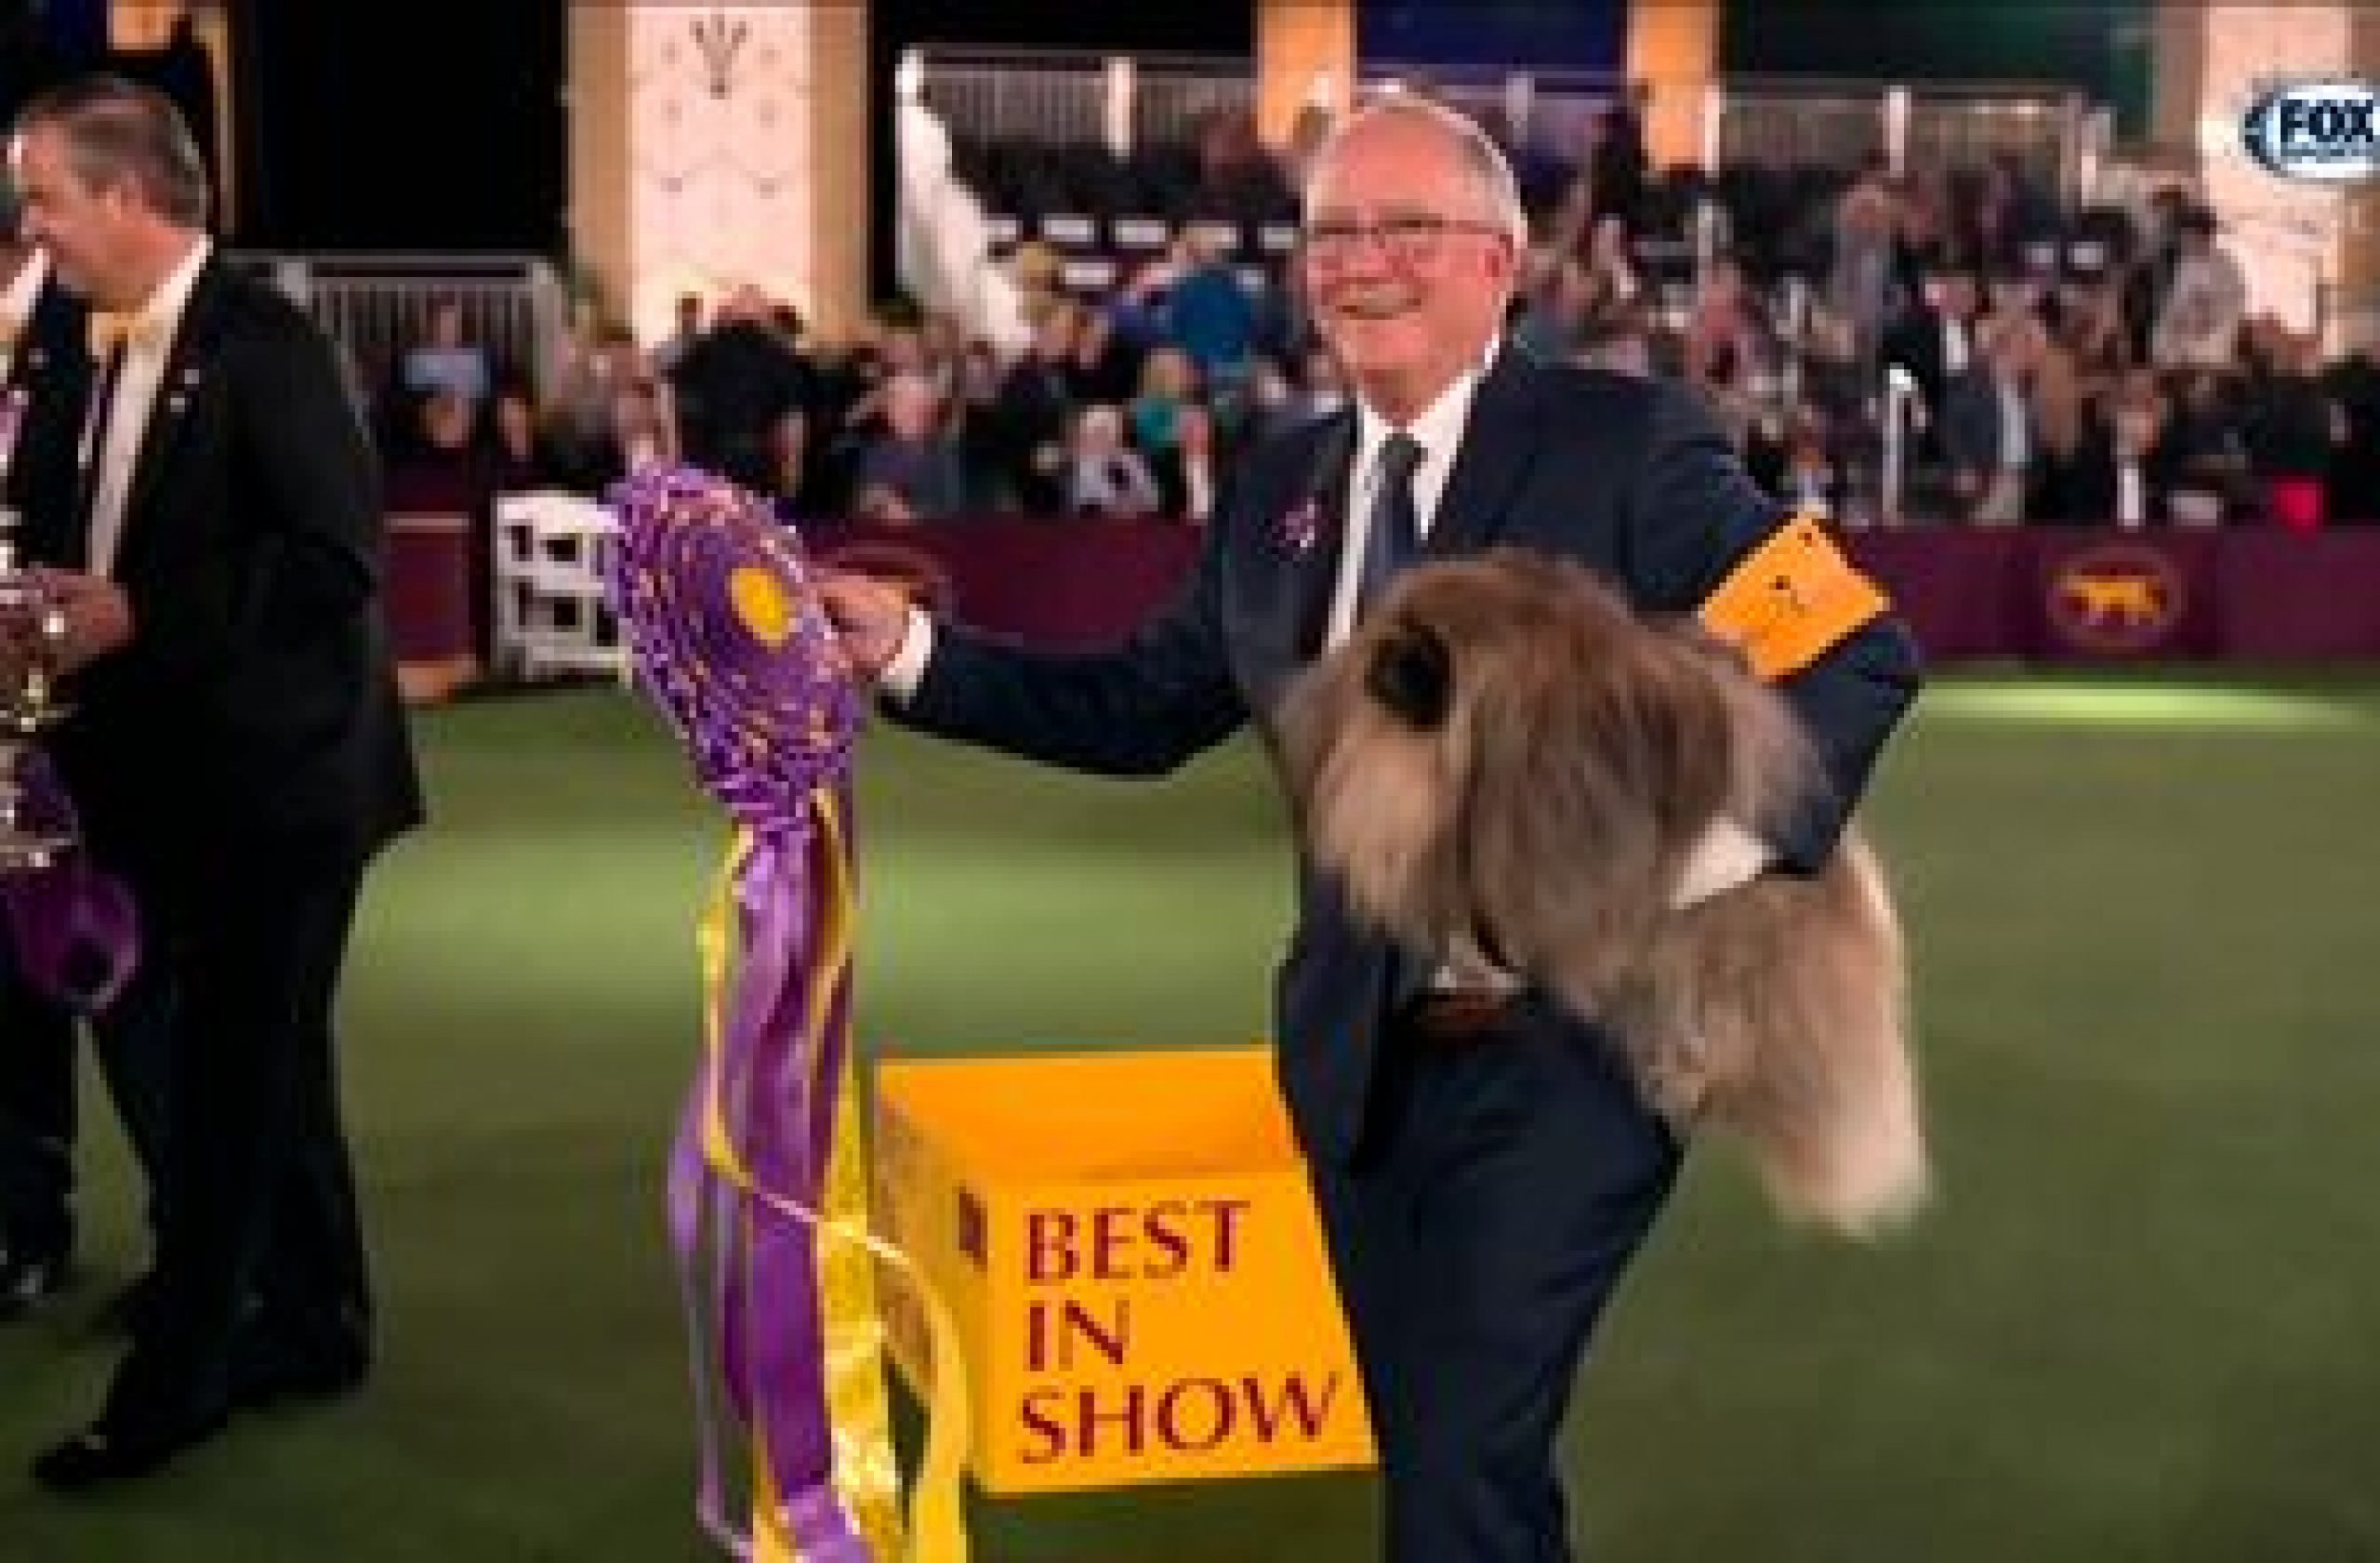 Wasabi, the Pekingese, crowned Best in Show at 145th Westminster Kennel Club Dog Show